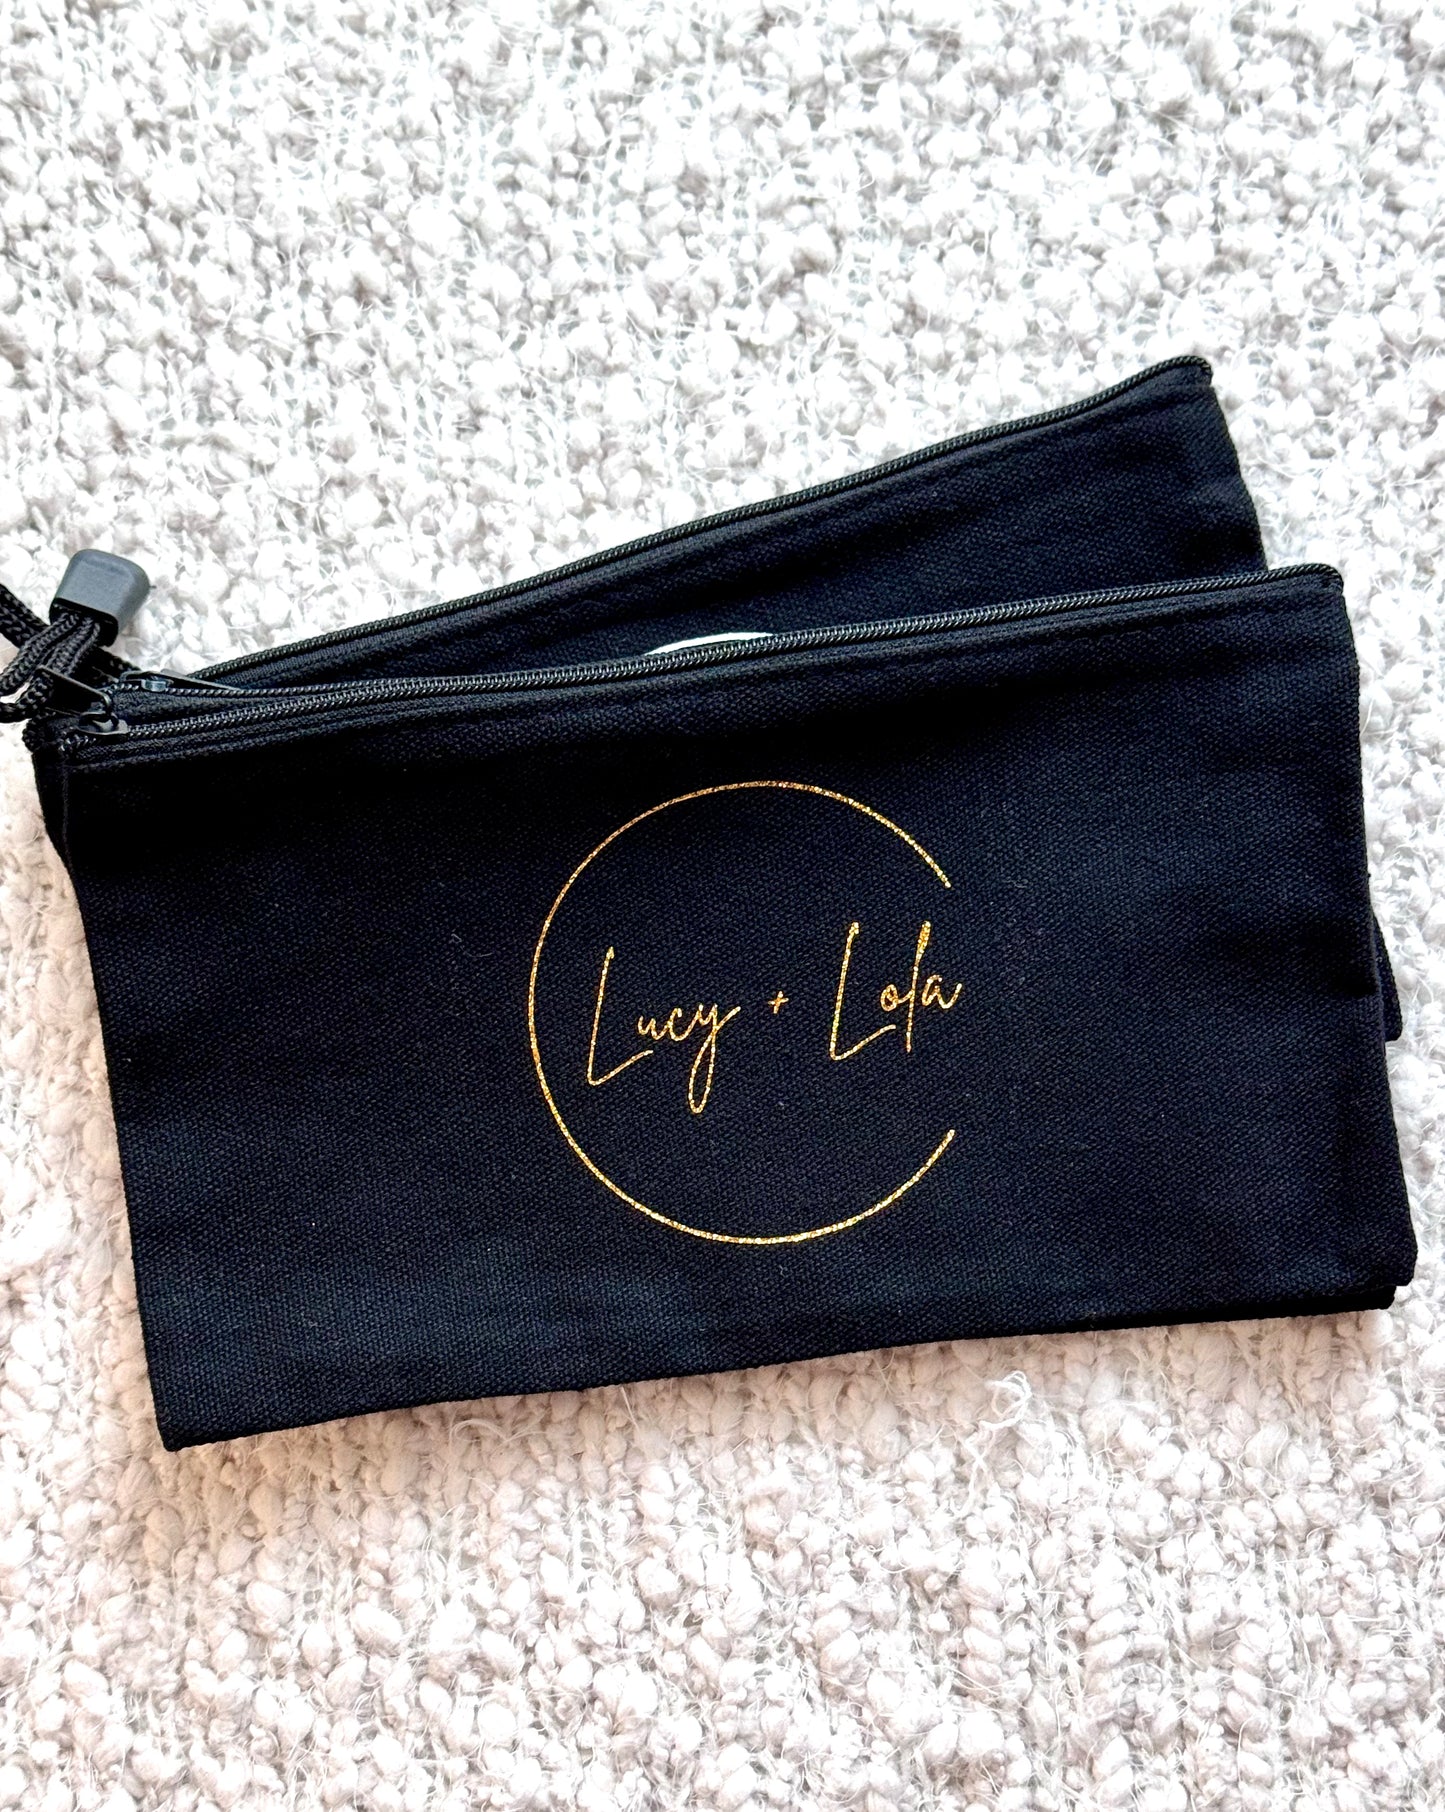 Lucy + Lola Black Pouch